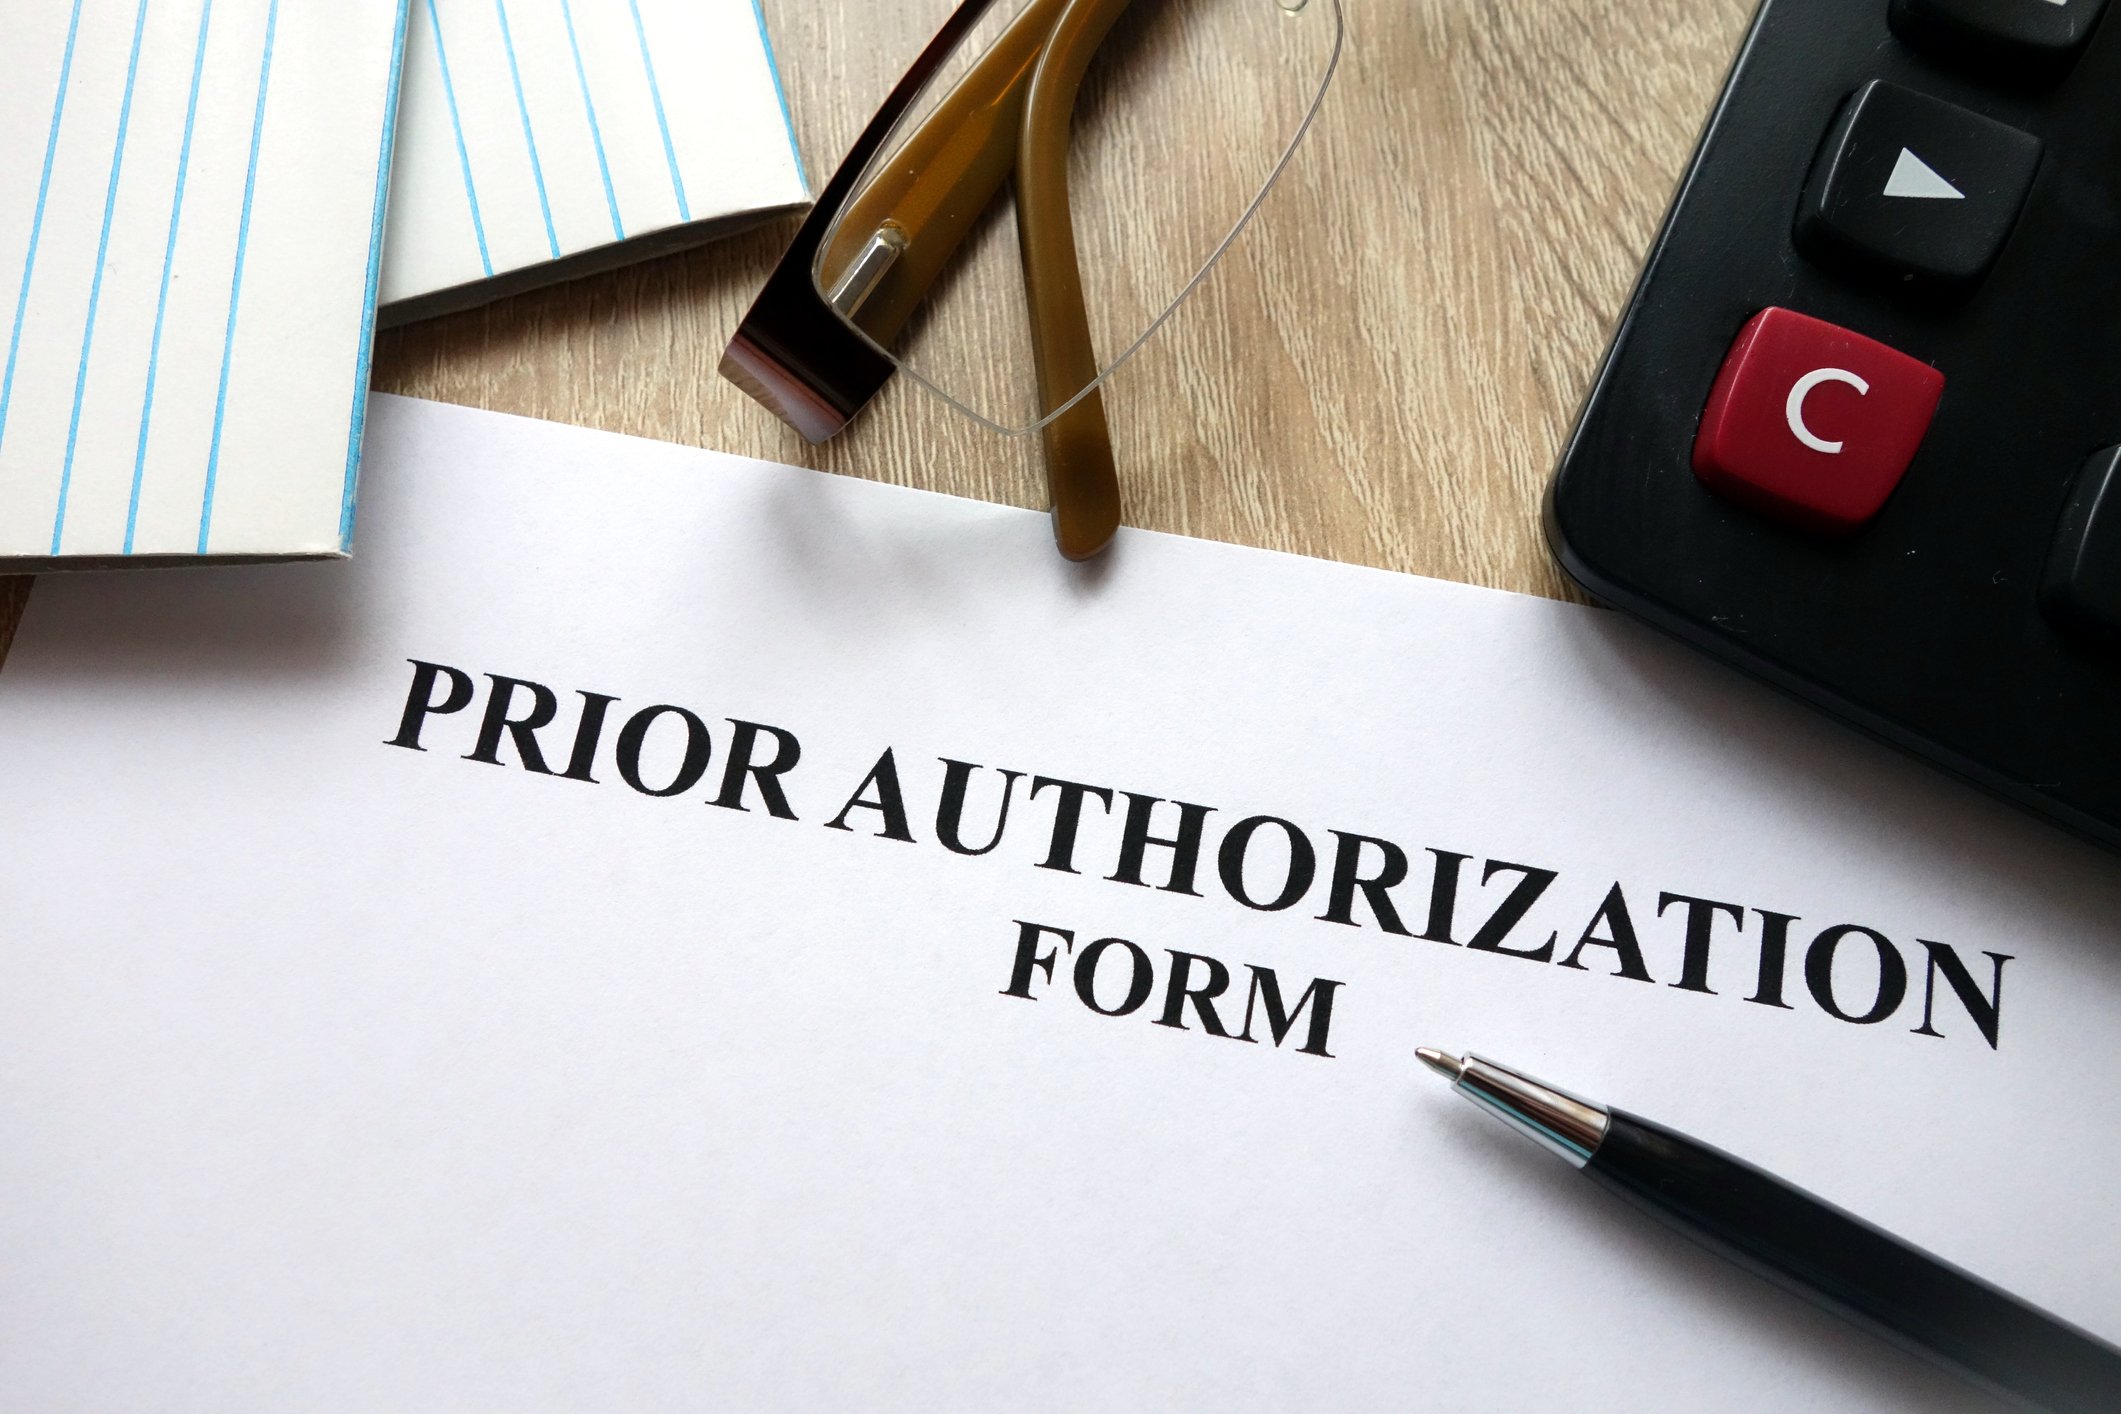 Prior authorization paperwork next to a calculator and pair of glasses